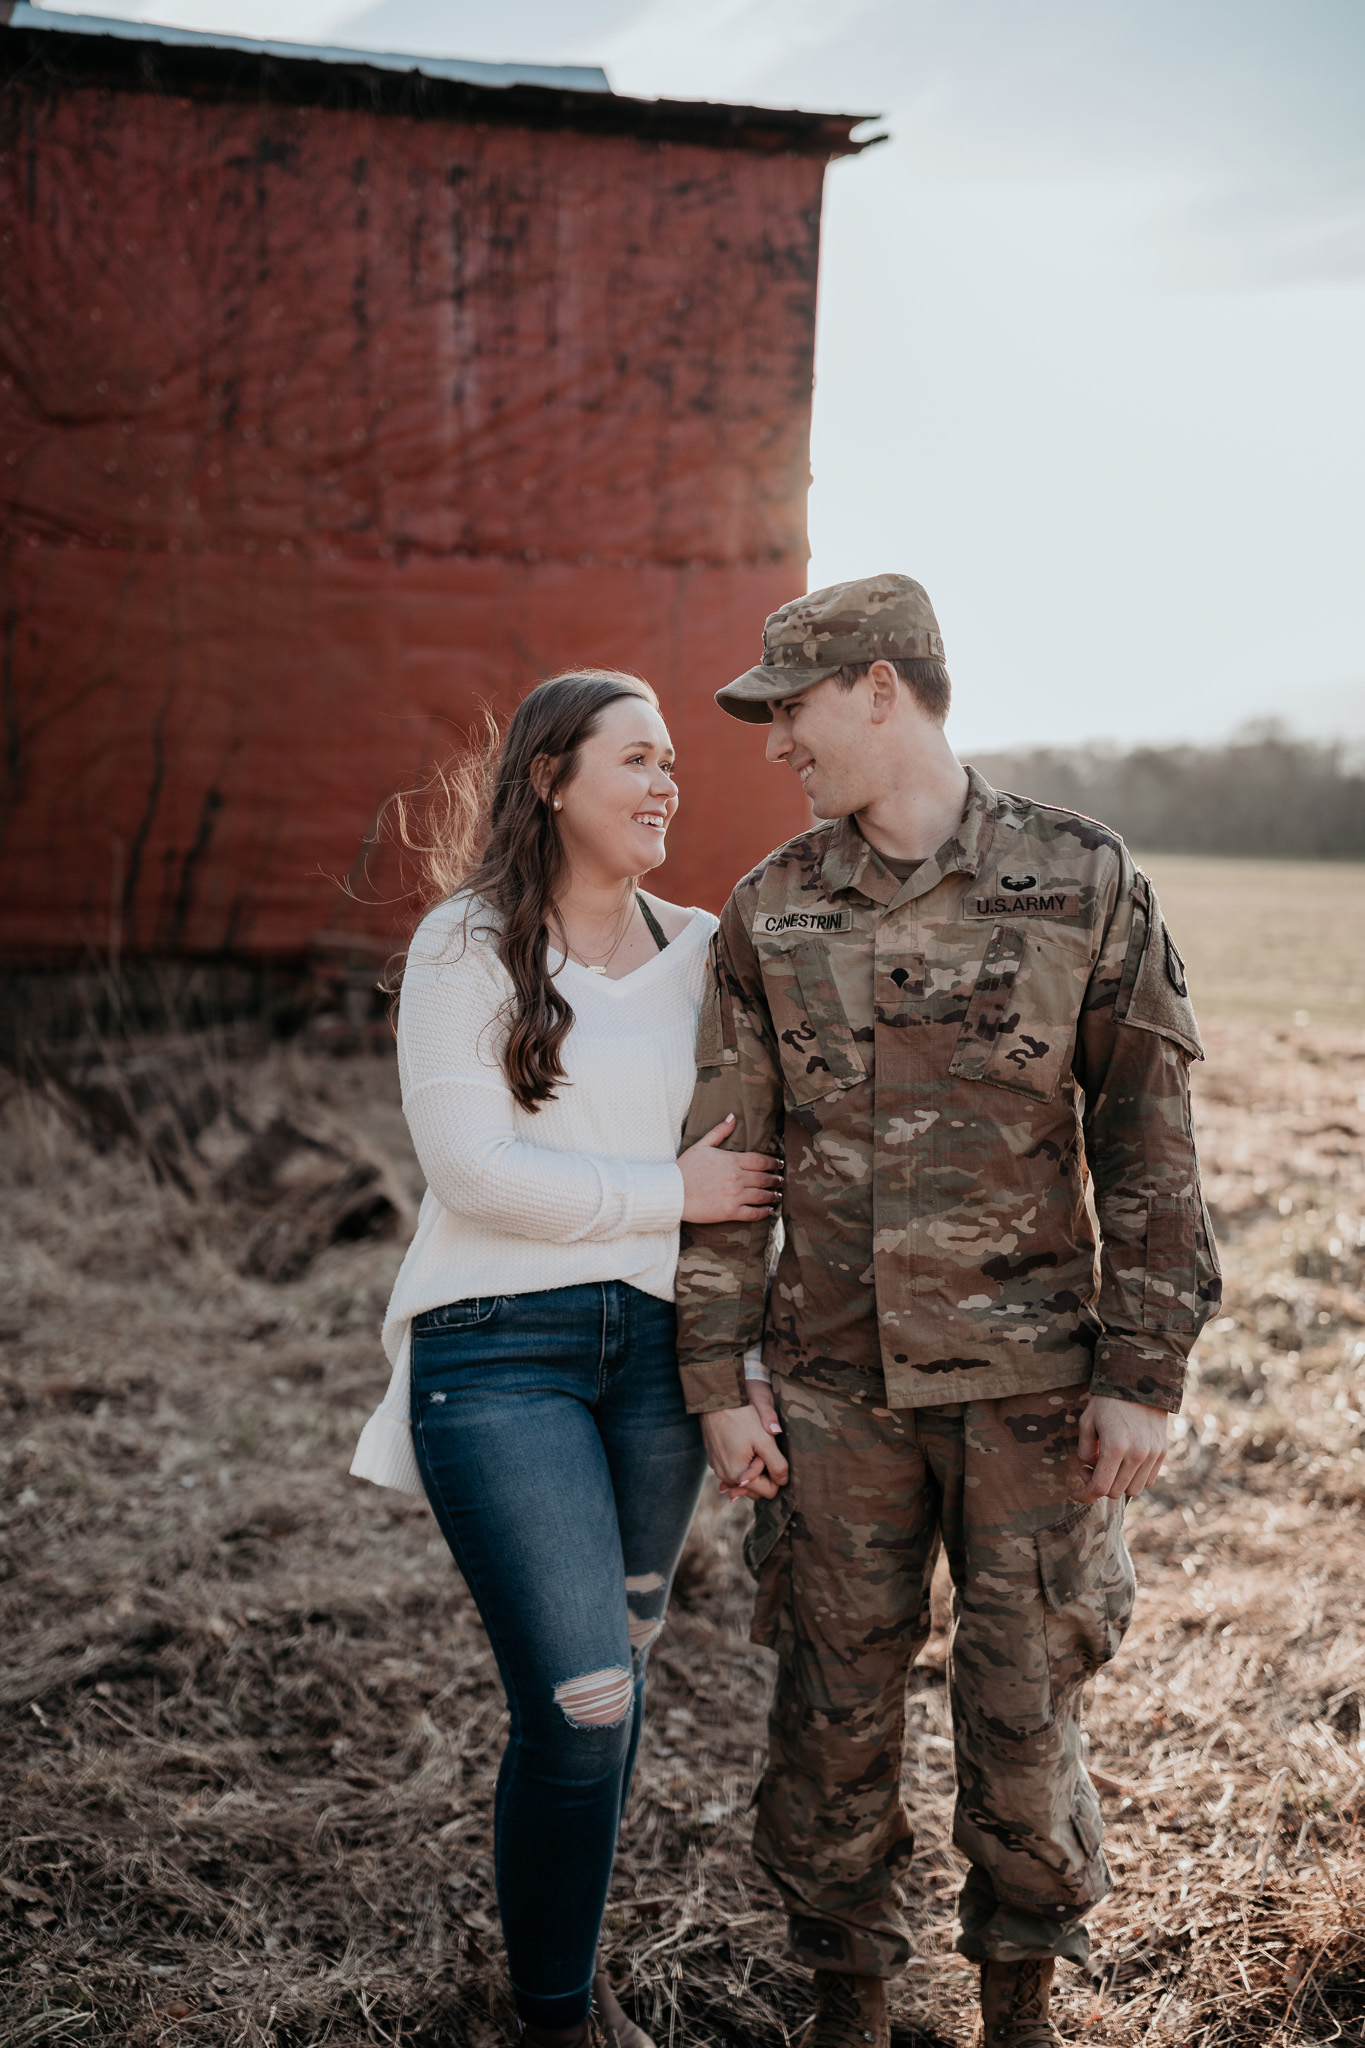 man in army uniform with girl